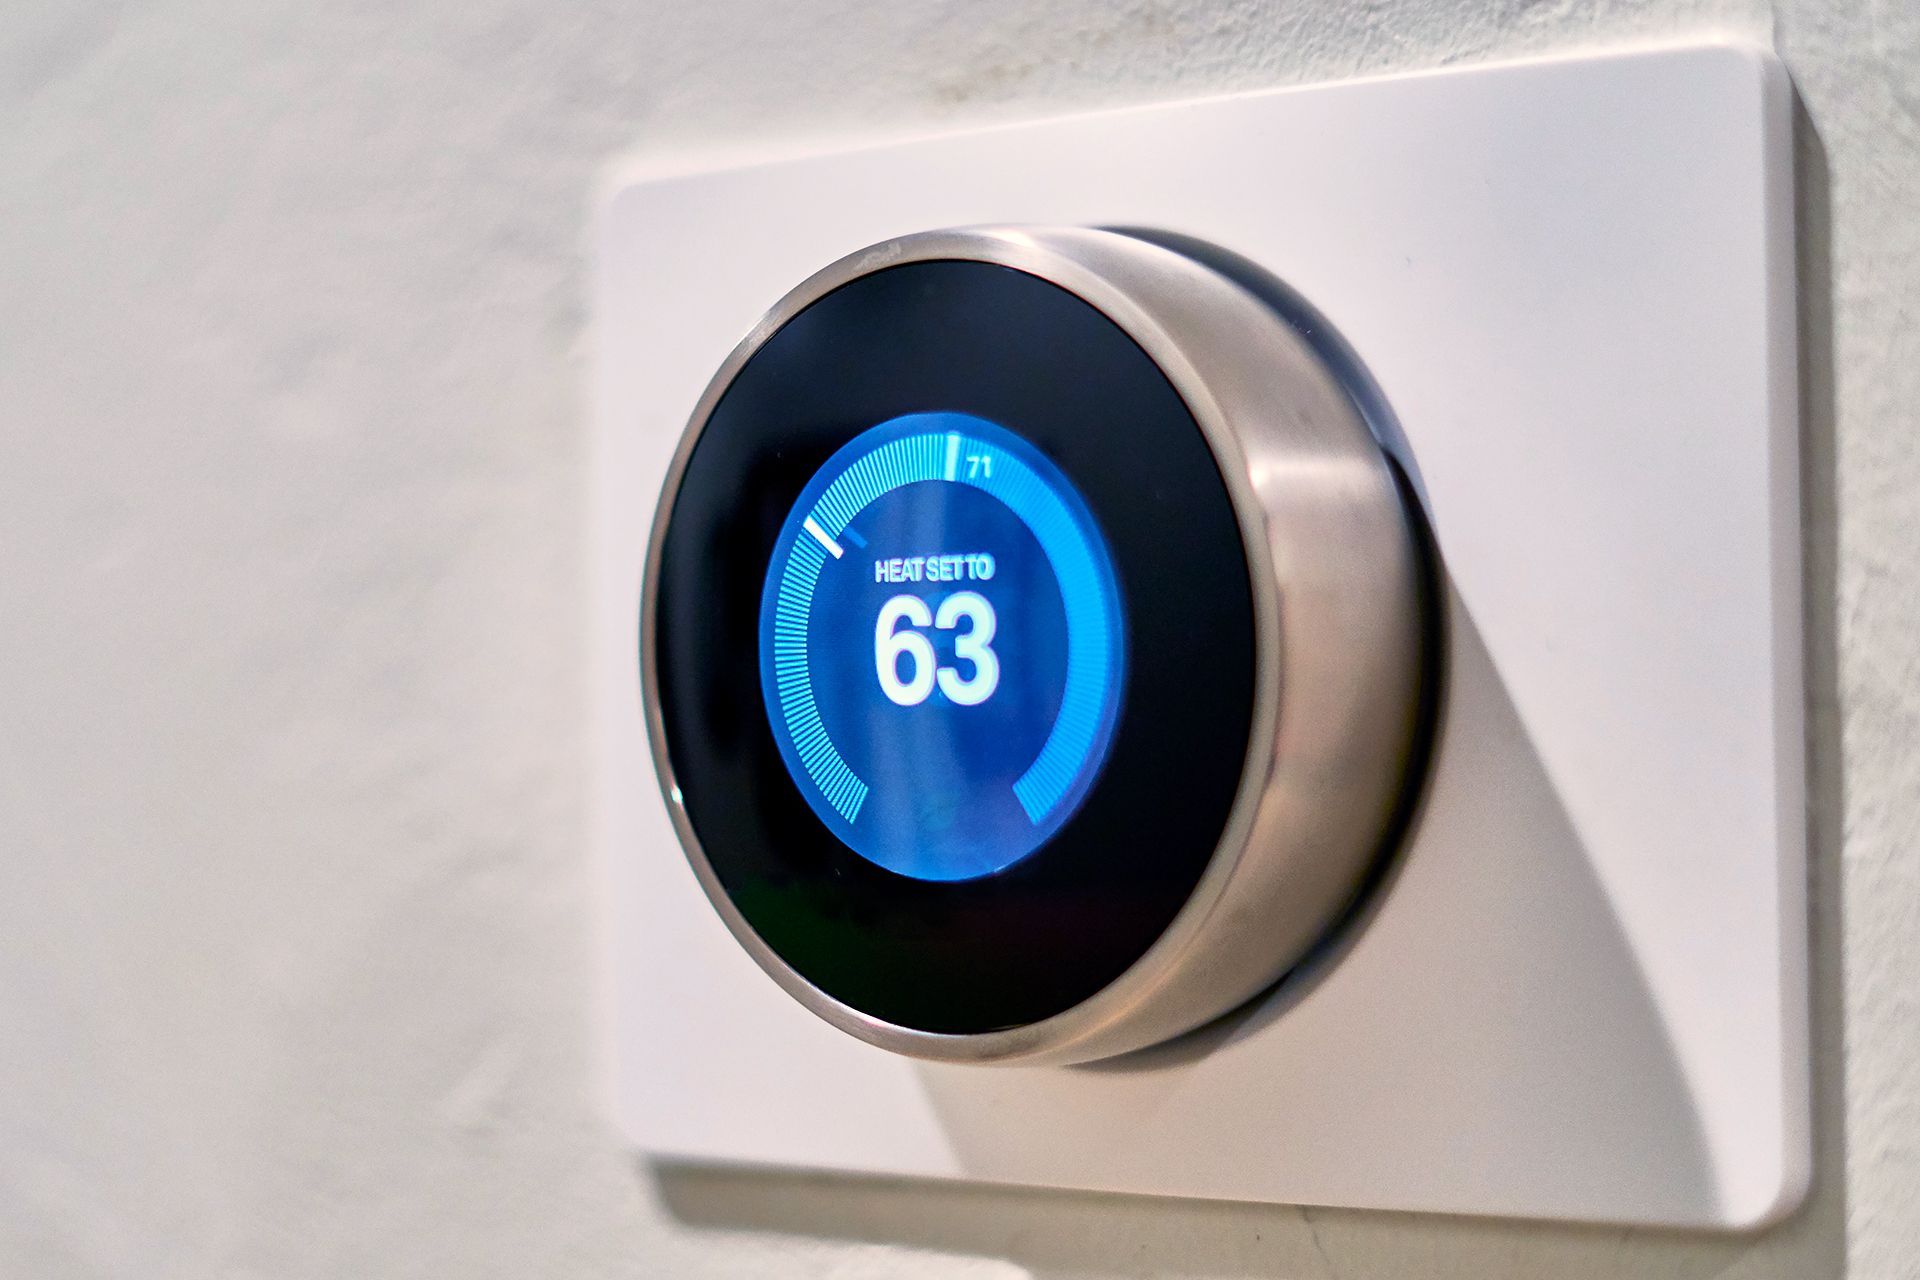 With so many smart thermostats on the market, how do you know which one is right for you?